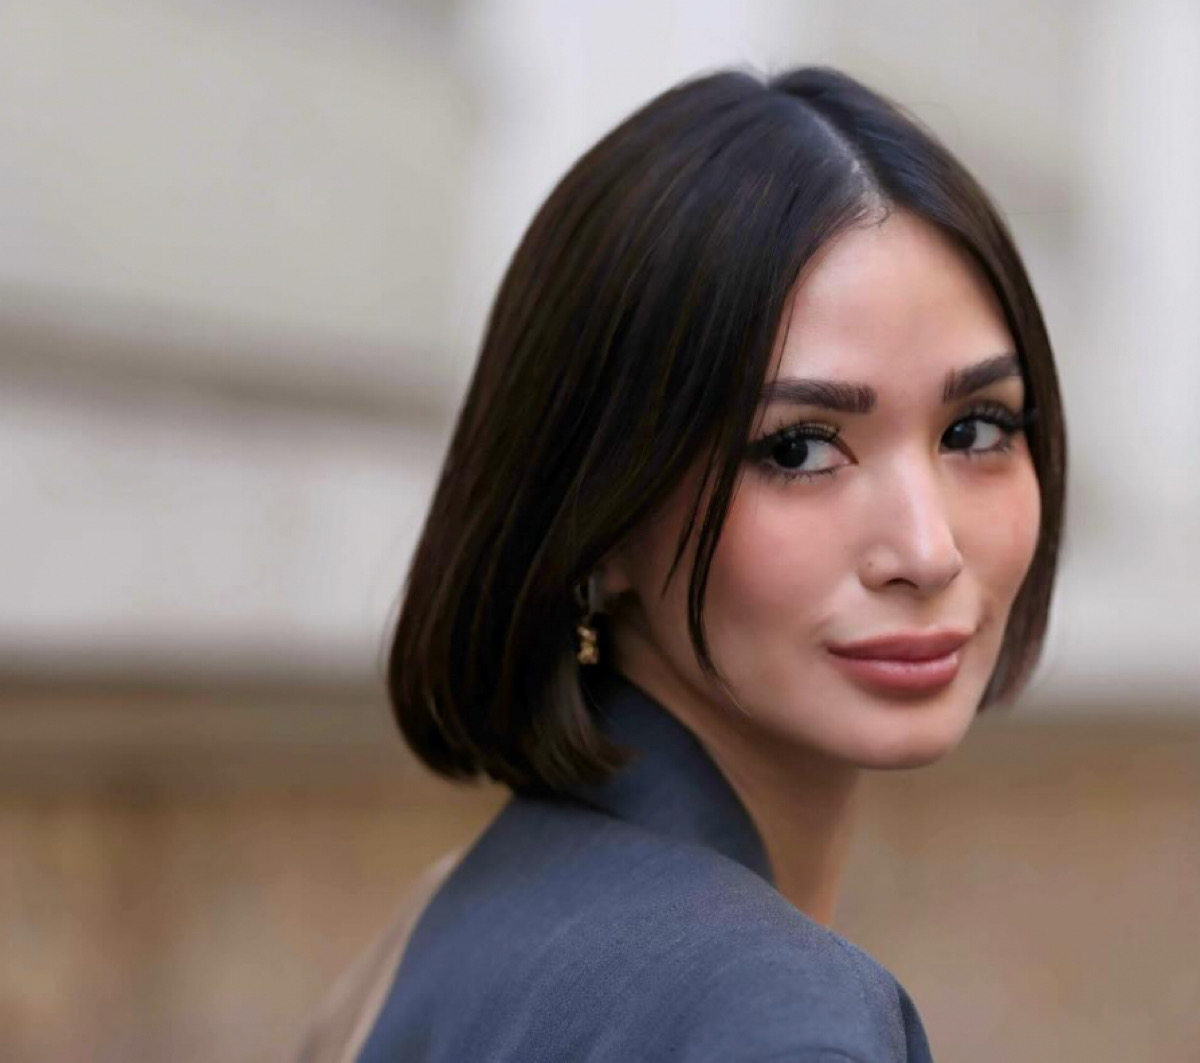 Heart Evangelista 'traumatized' after having uneven lips due to fillers